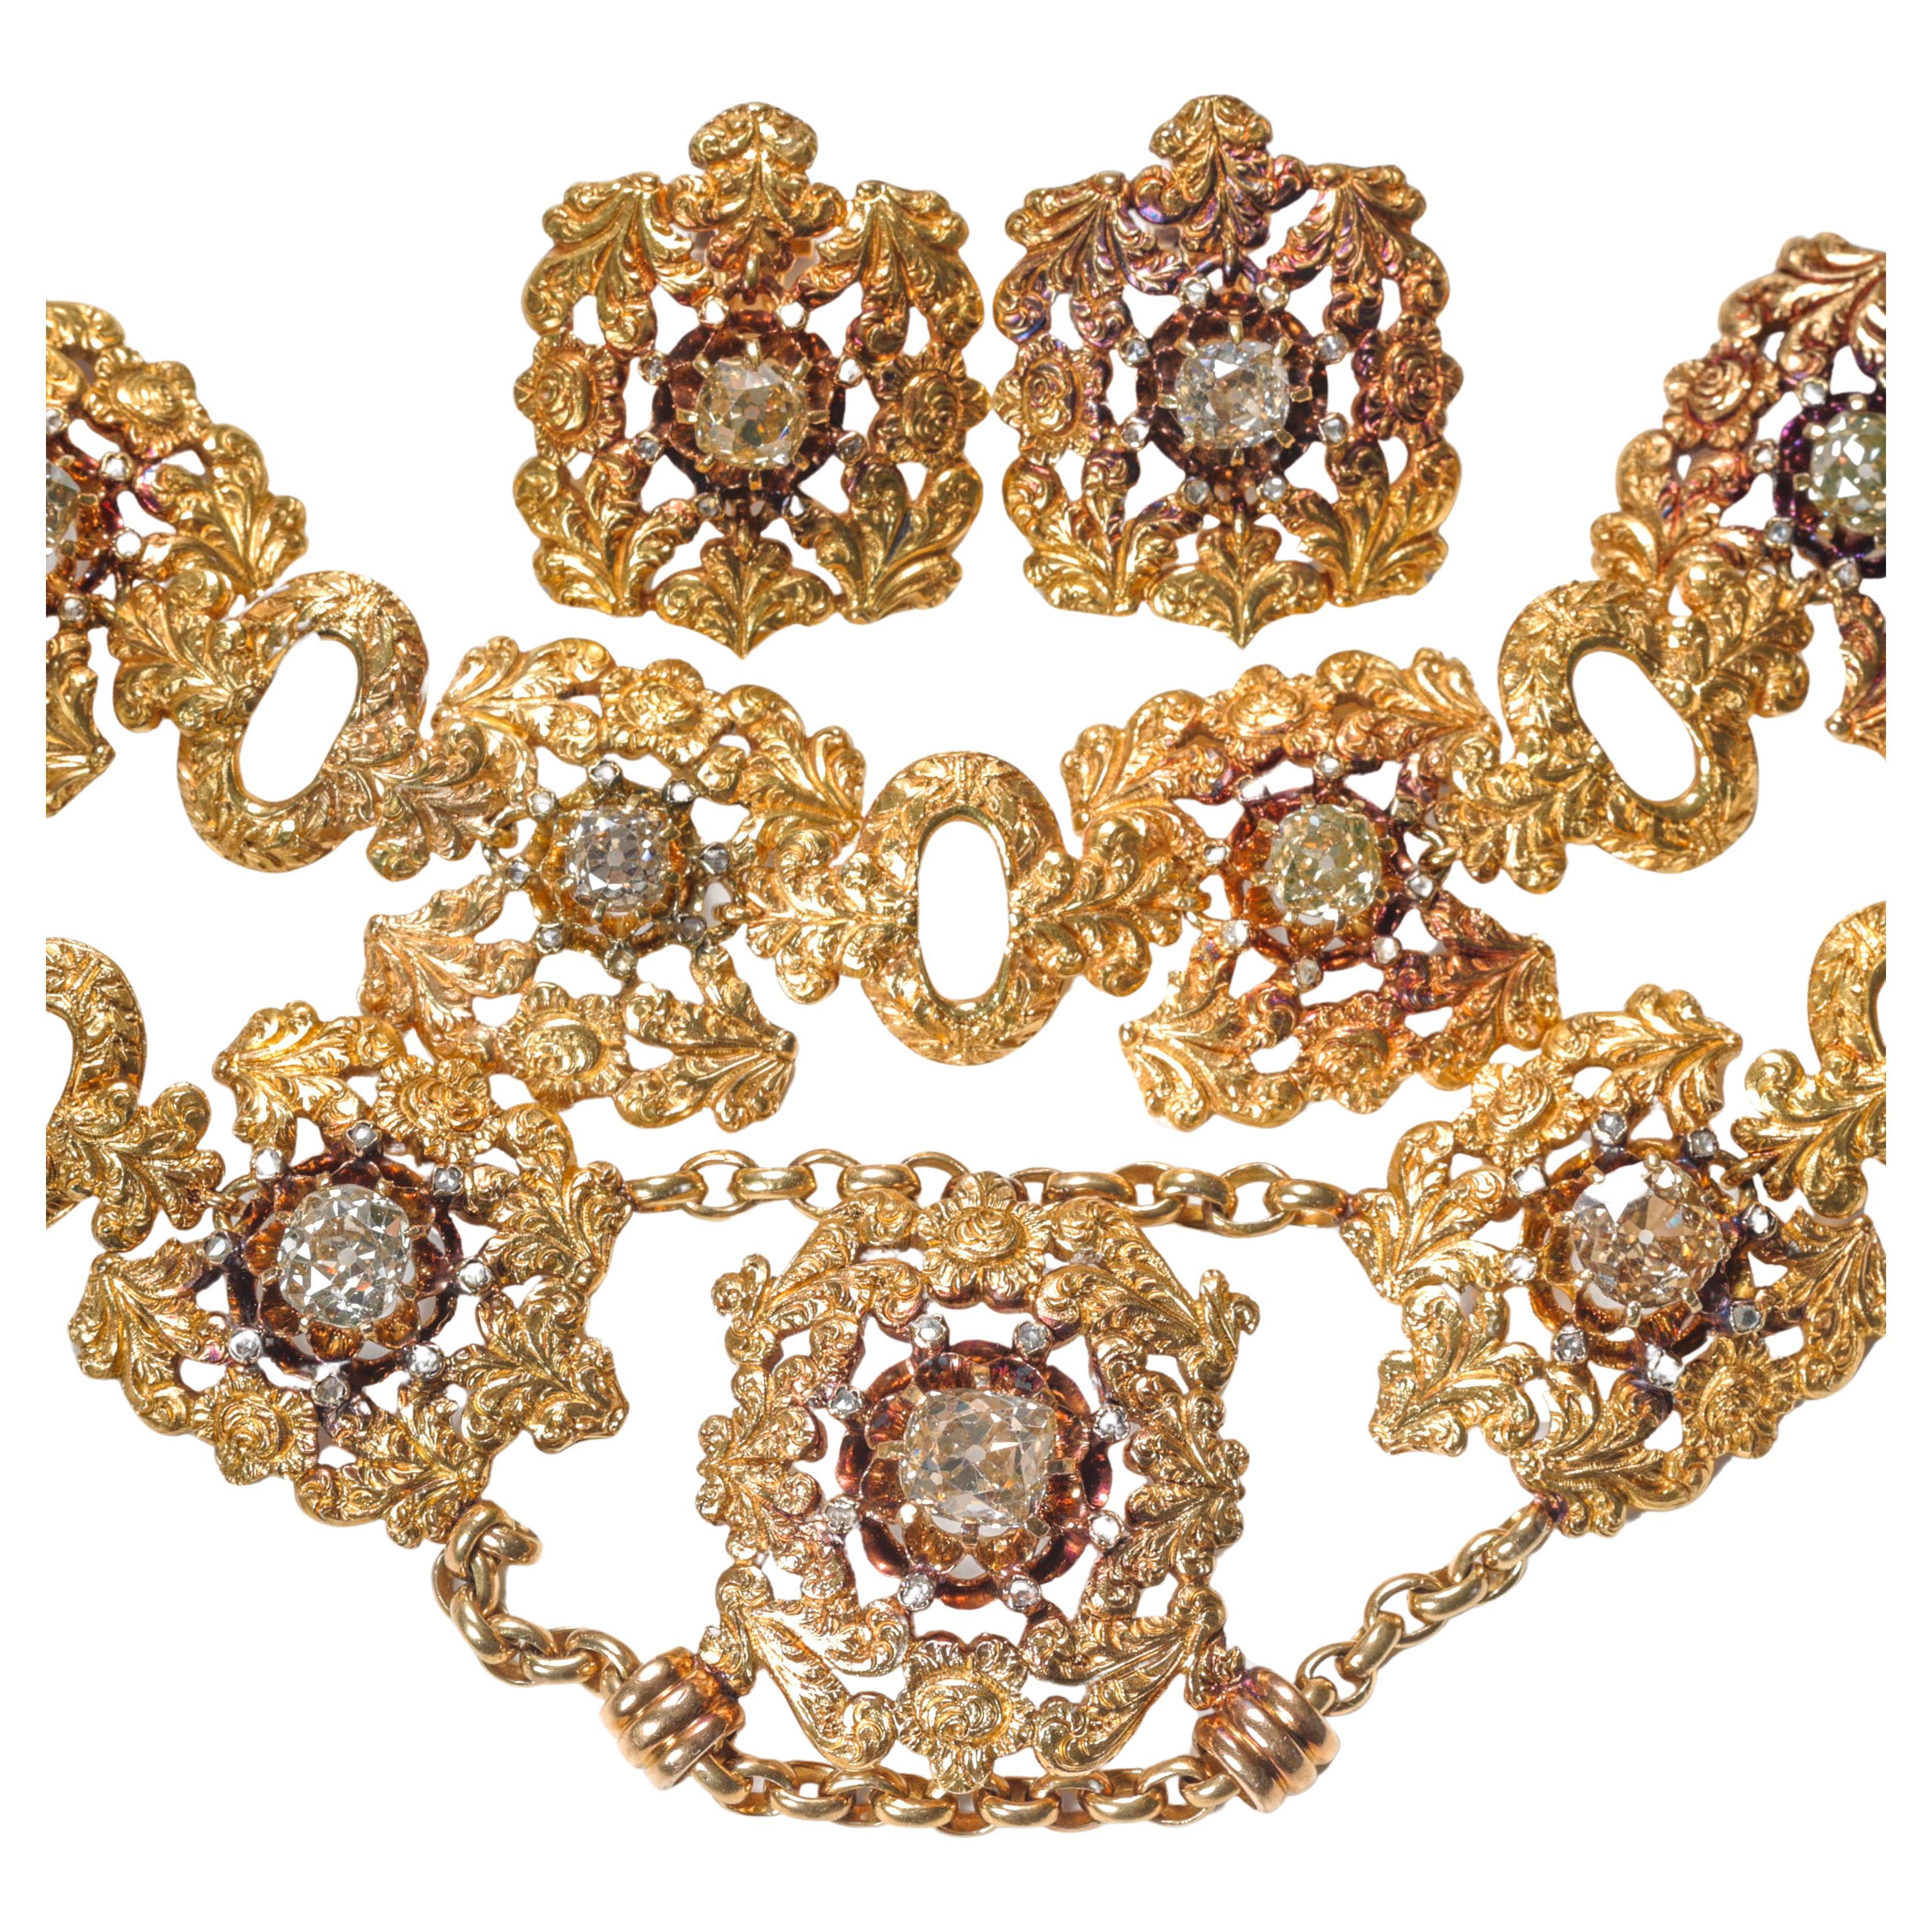 Buccellati Suite Created by Mario Buccellati Himself, $450k Official Evaluation  For Sale